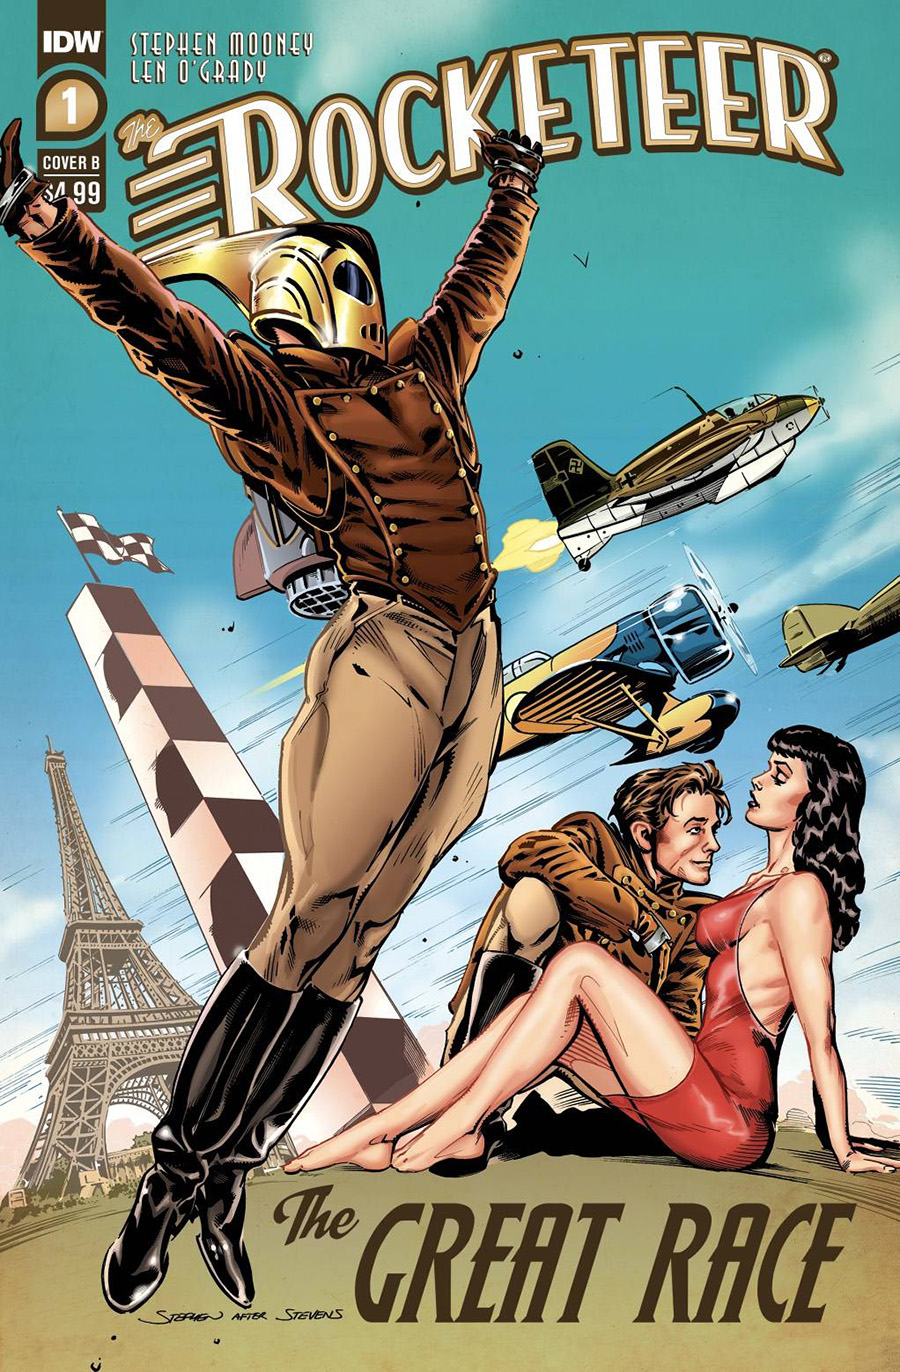 Rocketeer The Great Race #1 Cover B Variant Stephen Mooney Cover